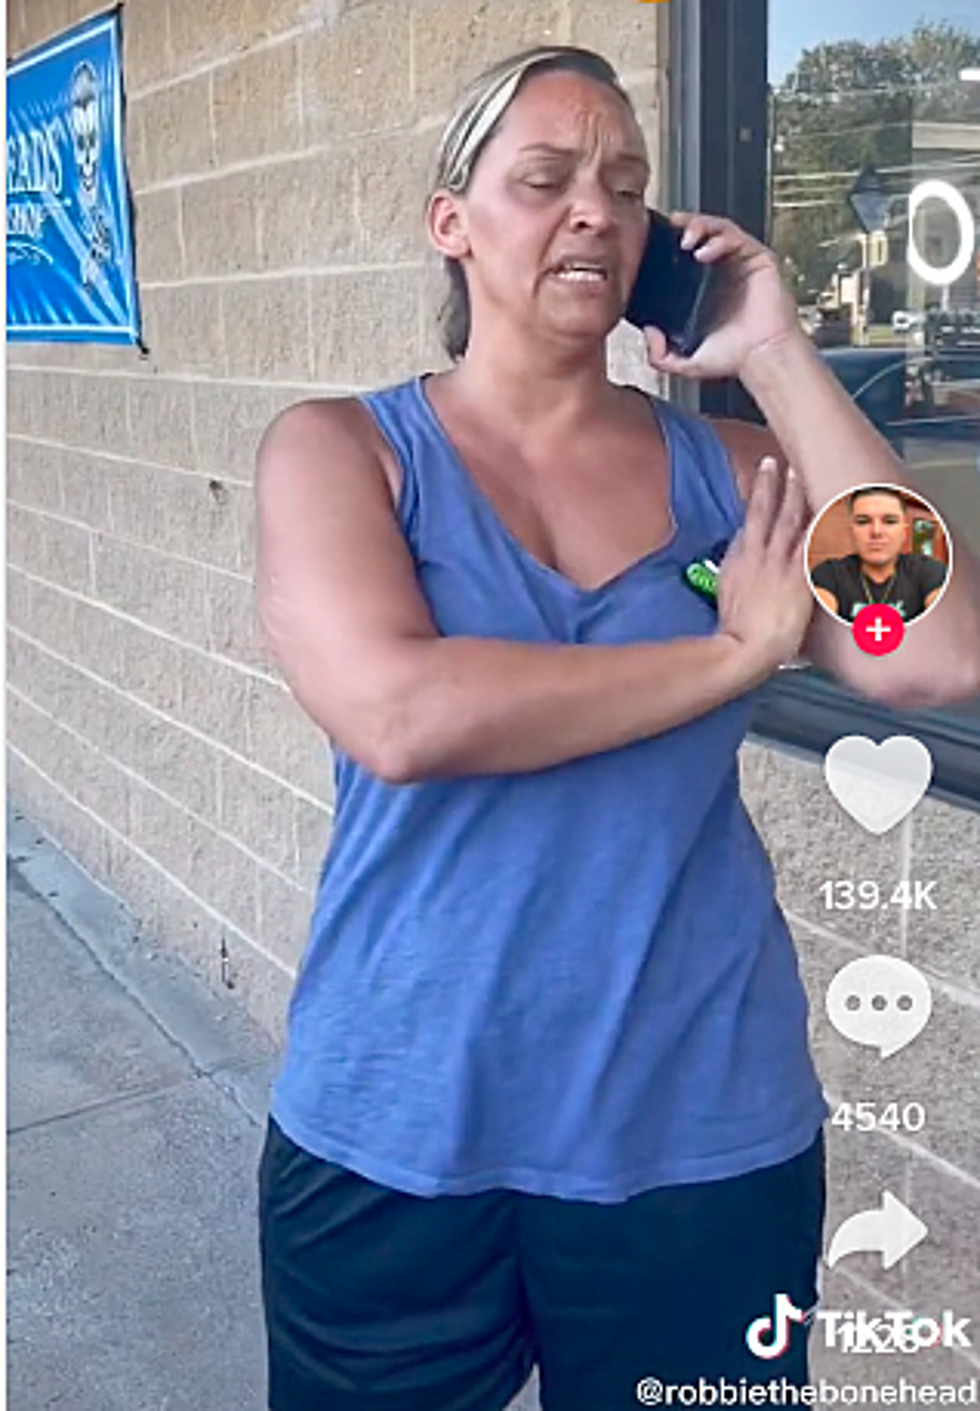 Watch Video of Massachusetts Mom Calling 911 After Her Son’s Haircut